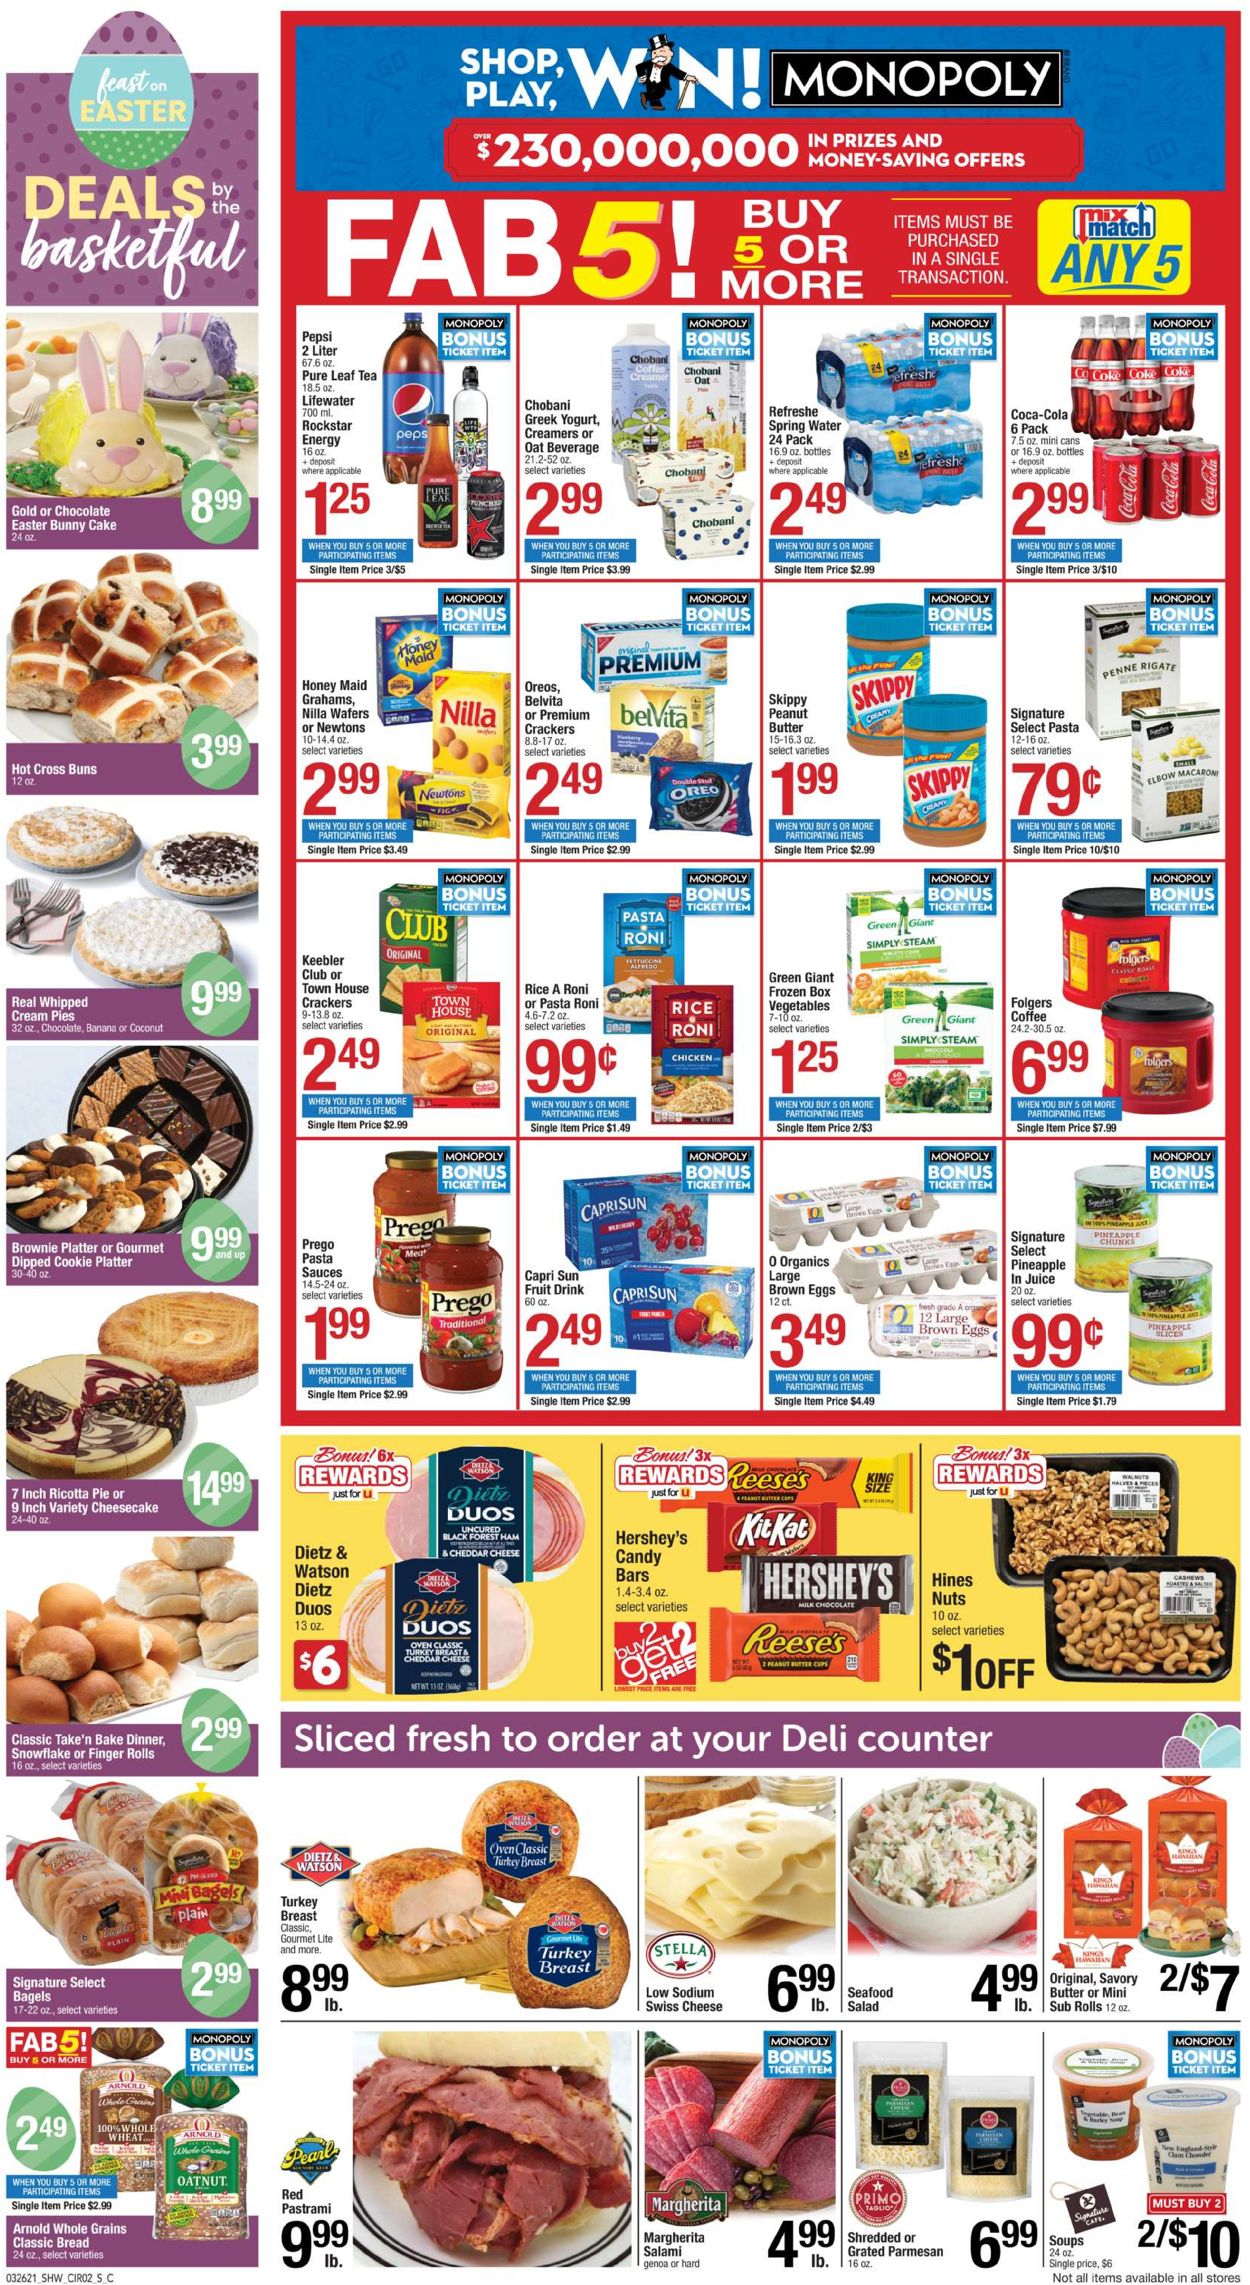 Shaw’s - Easter 2021 Ad Weekly Ad Circular - valid 03/26-04/01/2021 (Page 2)